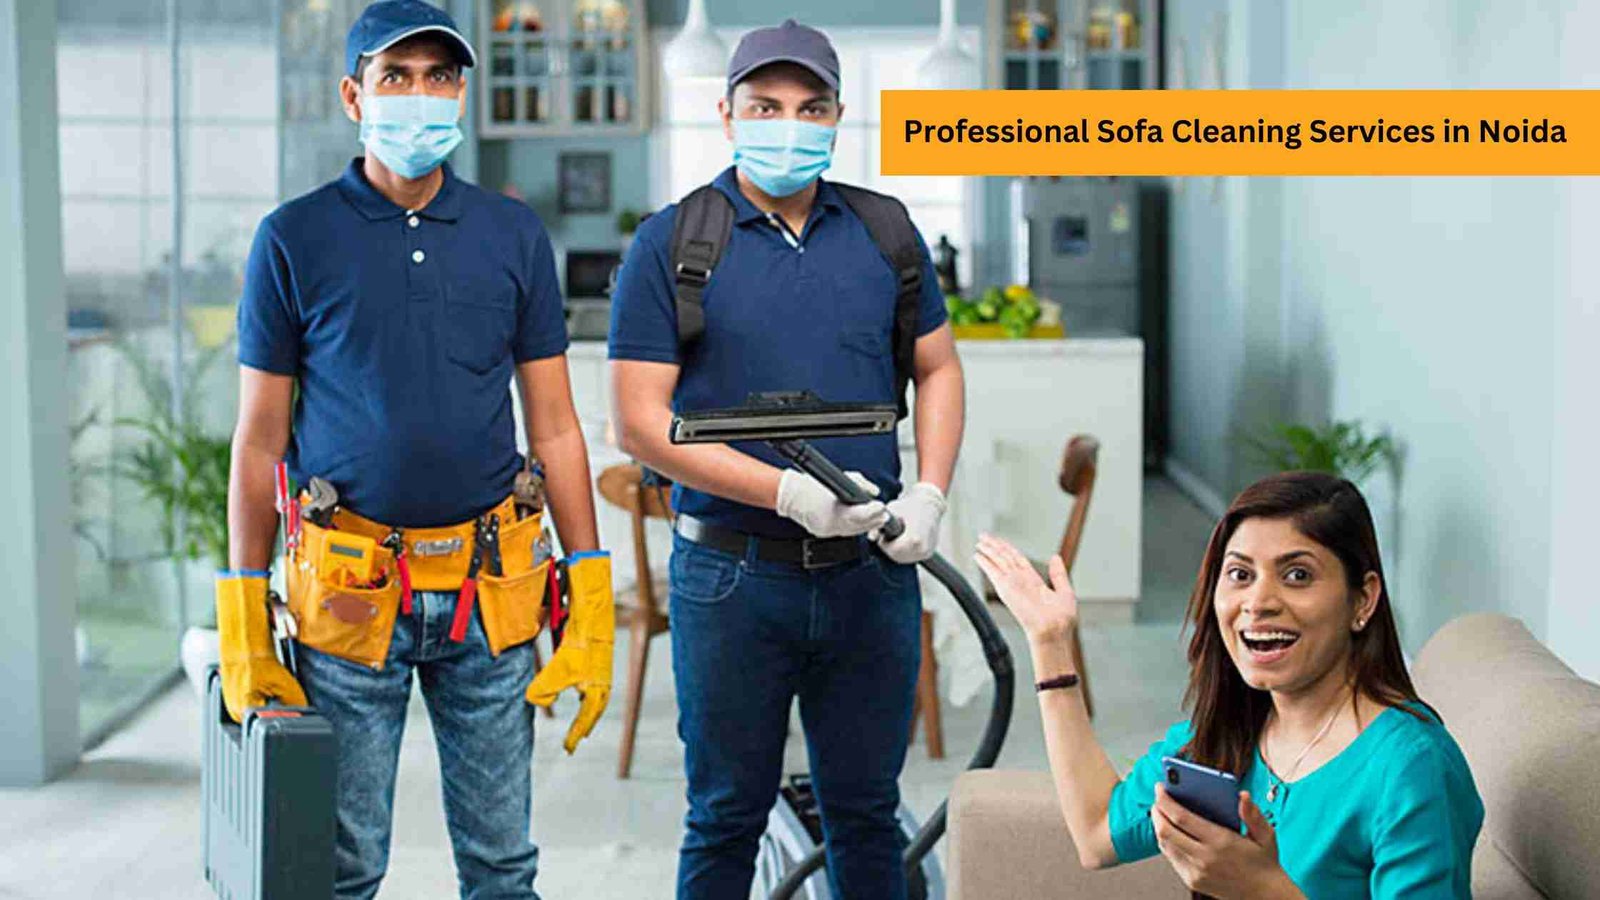 Sofa Cleaning Services in Noida